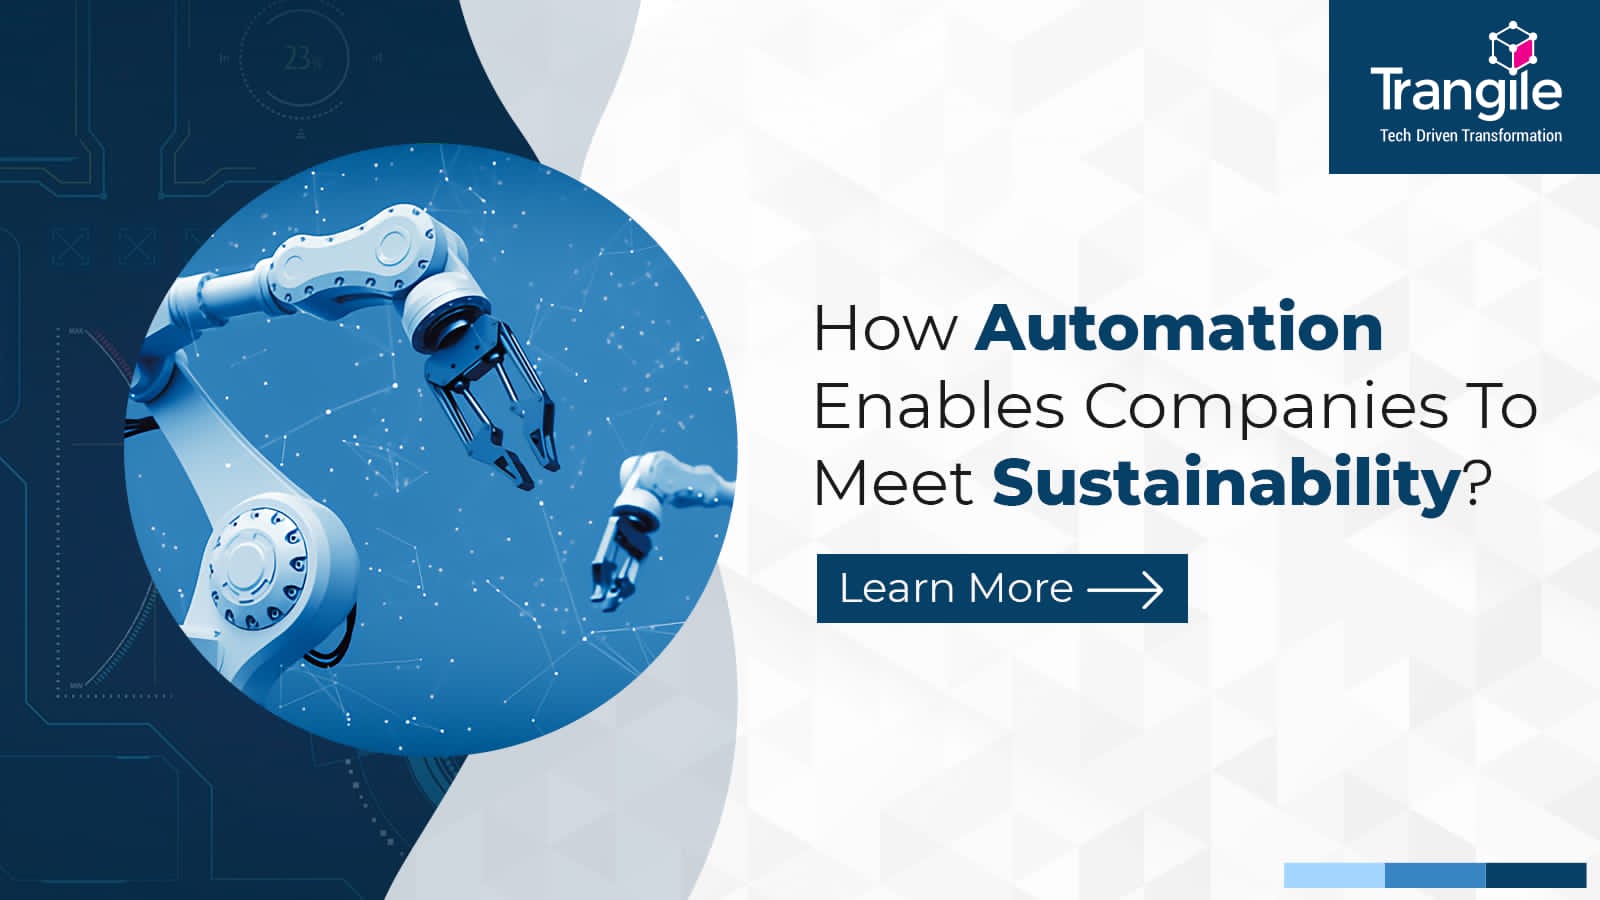 How Automation Enables Companies to Meet Sustainability?